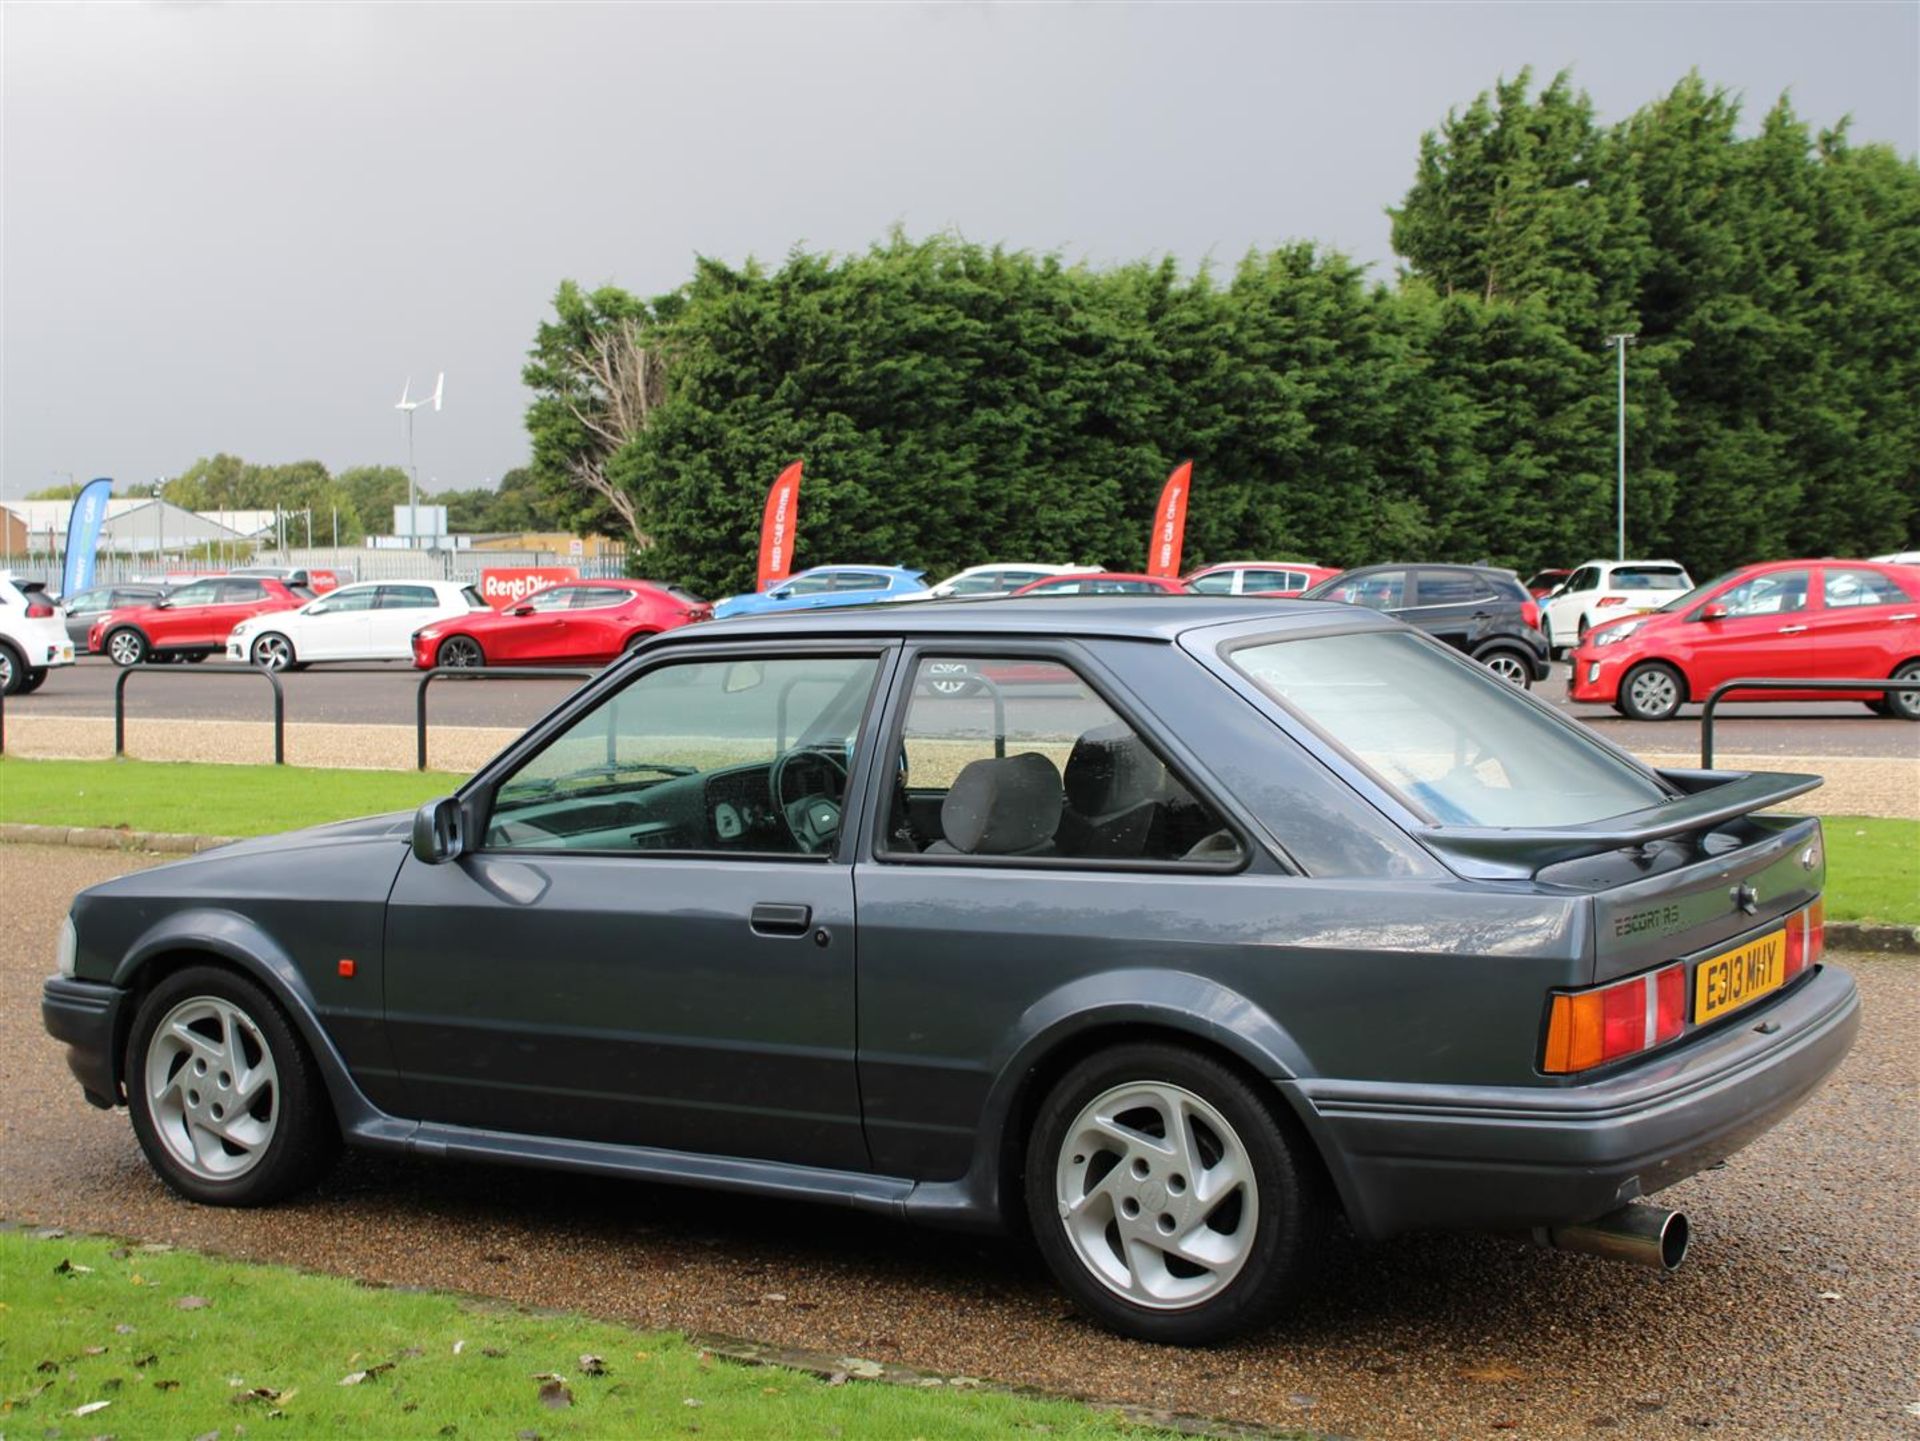 1988 Ford Escort RS Turbo - Image 21 of 21